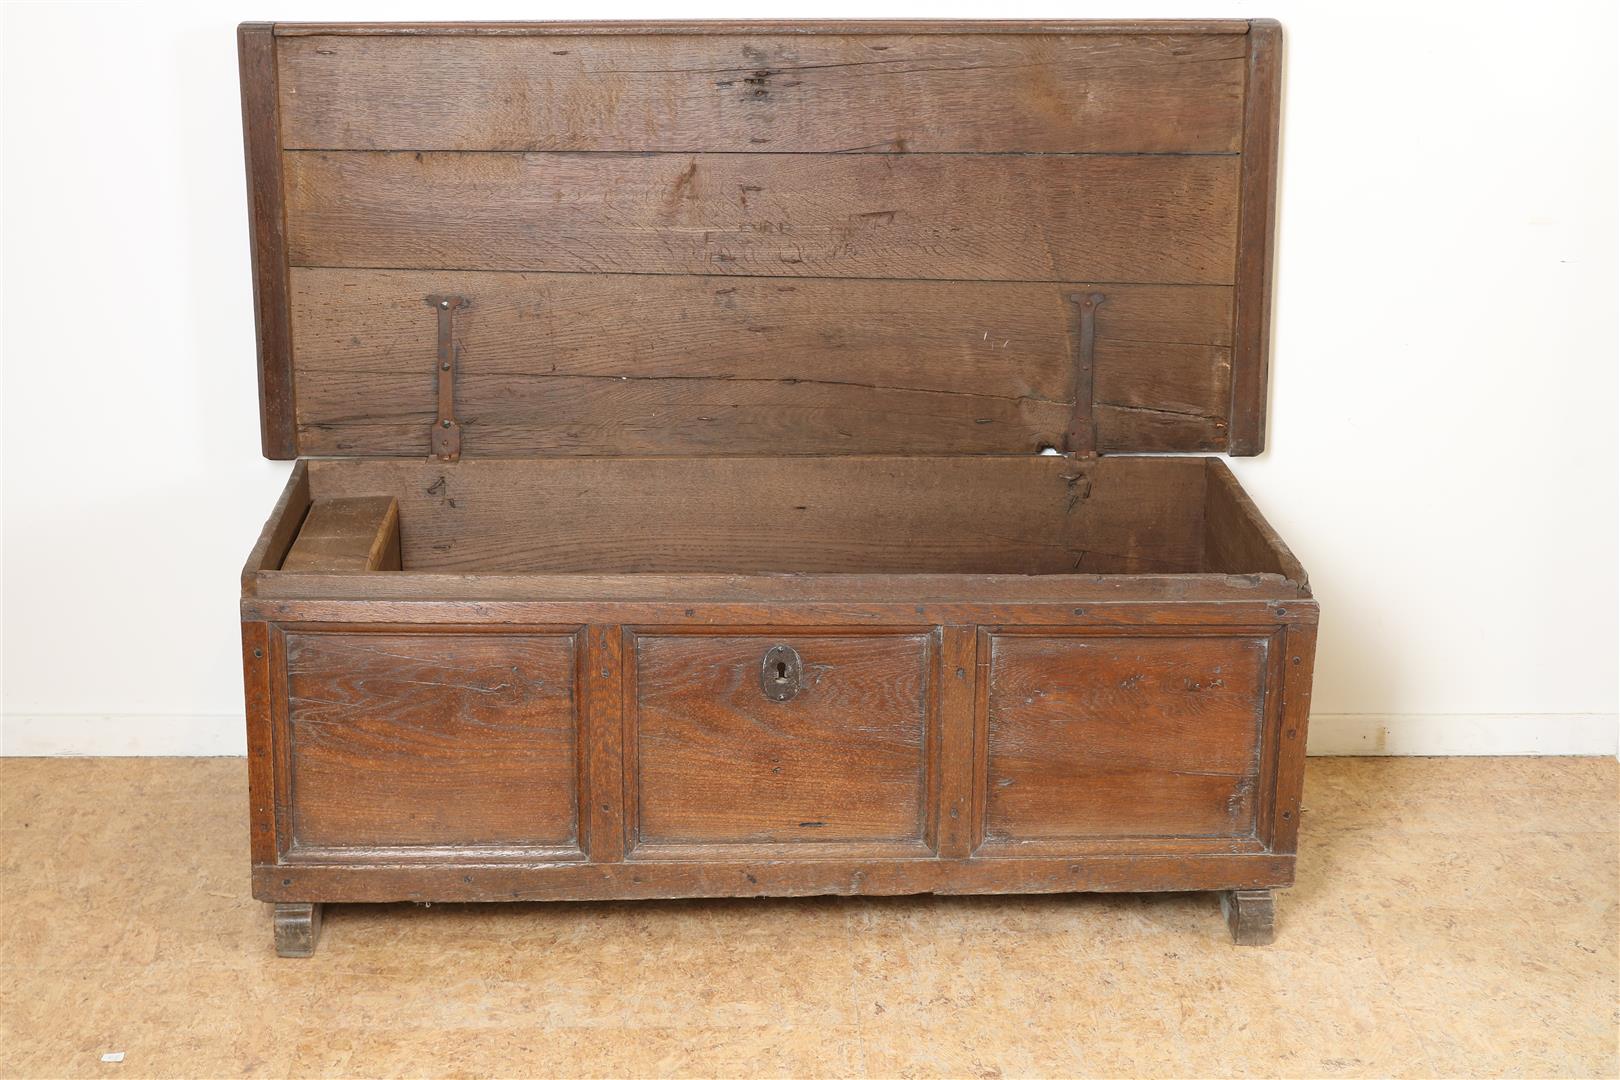 Oak blanket chest with 3 front panels, resting cap, struts, 18th century, 47 x 128 x 55 cm. - Image 2 of 4